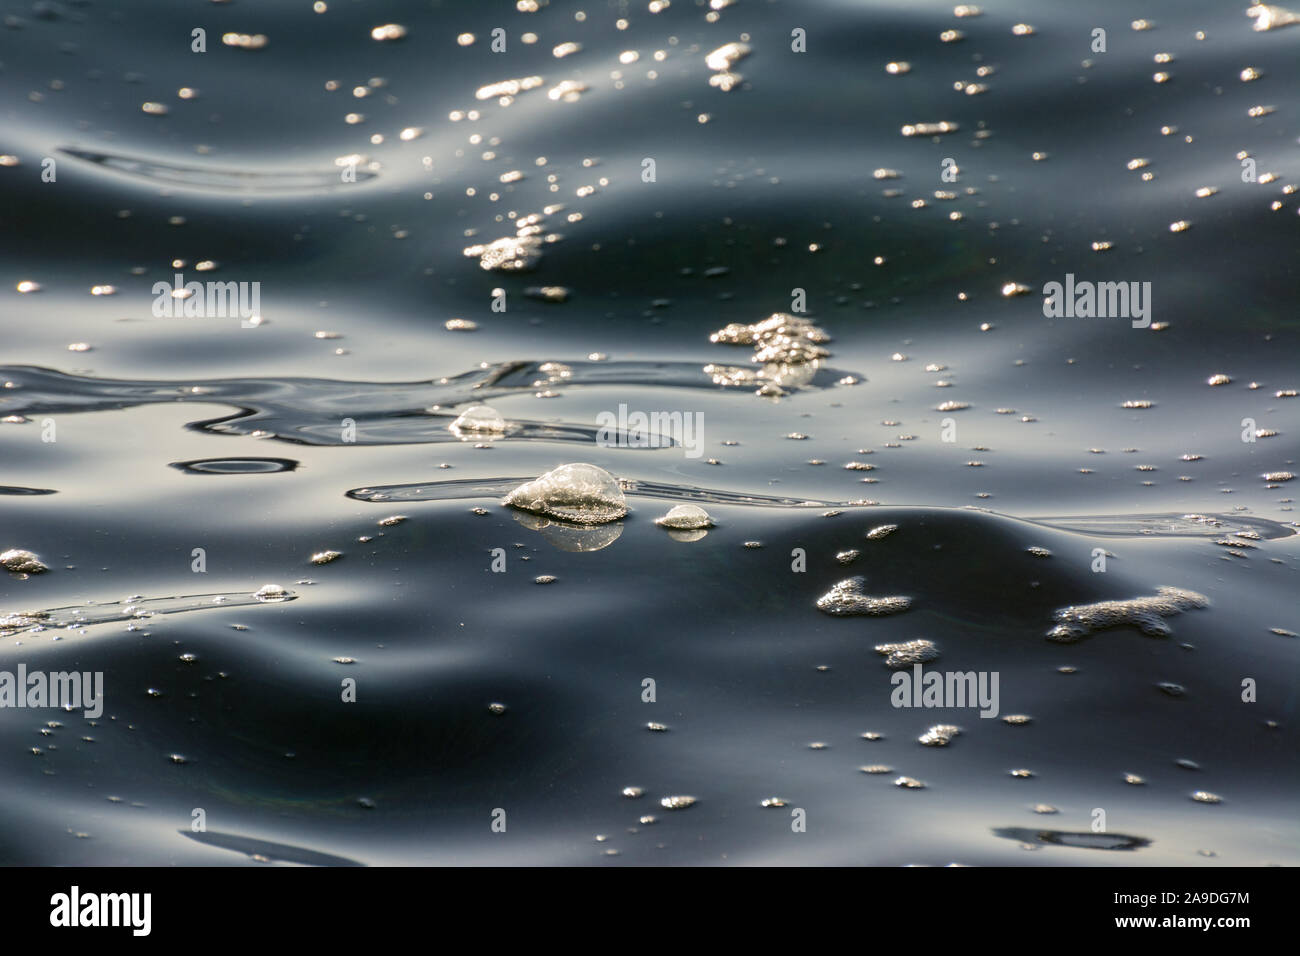 Abstract study of bubbles and foam forming on sea water, very shallow depth of field. Stock Photo